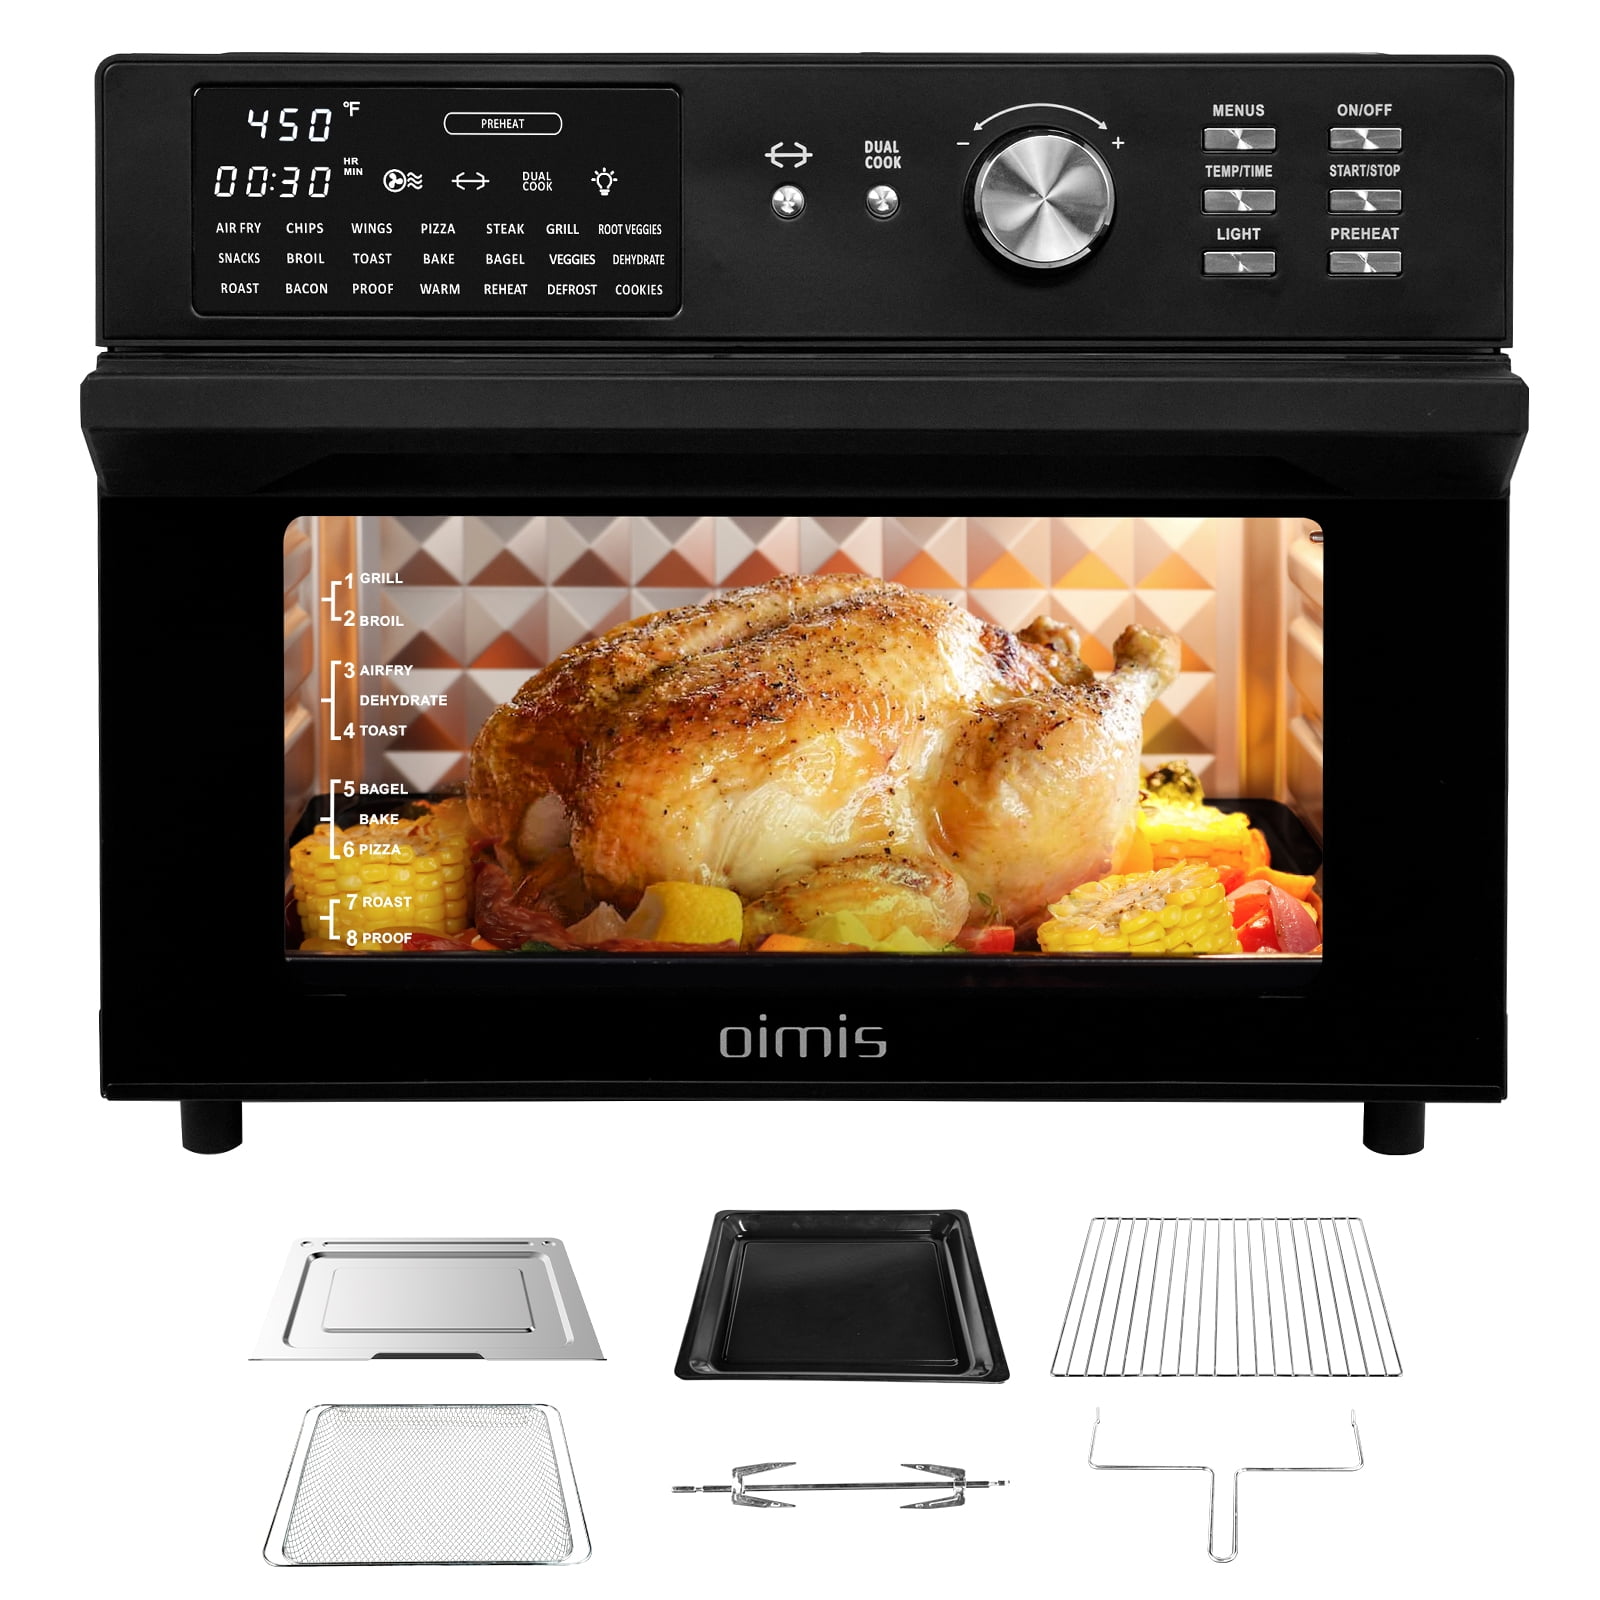 Beelicious® 32 Quart Air Fryer Ovens, Extra Large Air Fryer with Rotisserie  and Dehydrator, 19-in-1 Toaster Oven Convection Oven Combo, 6 Accessories